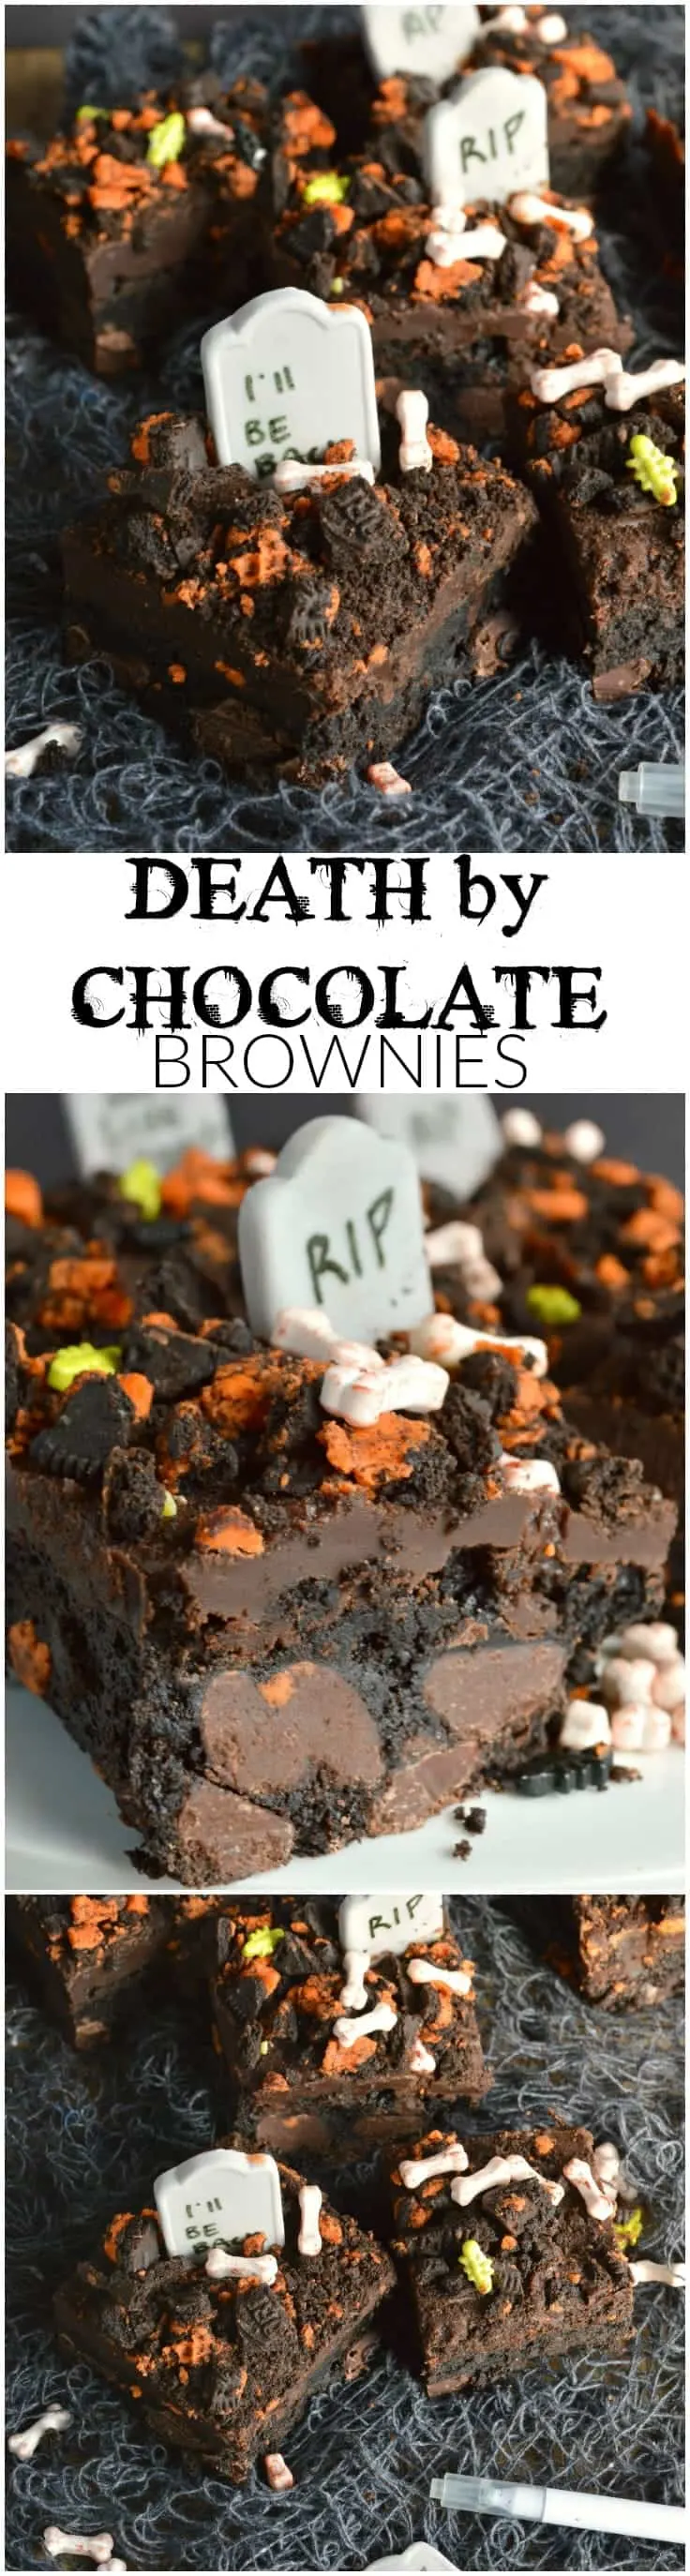 Death by Chocolate Brownies - what a way to go! Thick fudgy brownies are loaded with chocolate chunks, topped with rich chocolate ganache and crushed Oreo cookies. These are all dressed up for Halloween, but they are sure to quell that chocolate craving all year round!